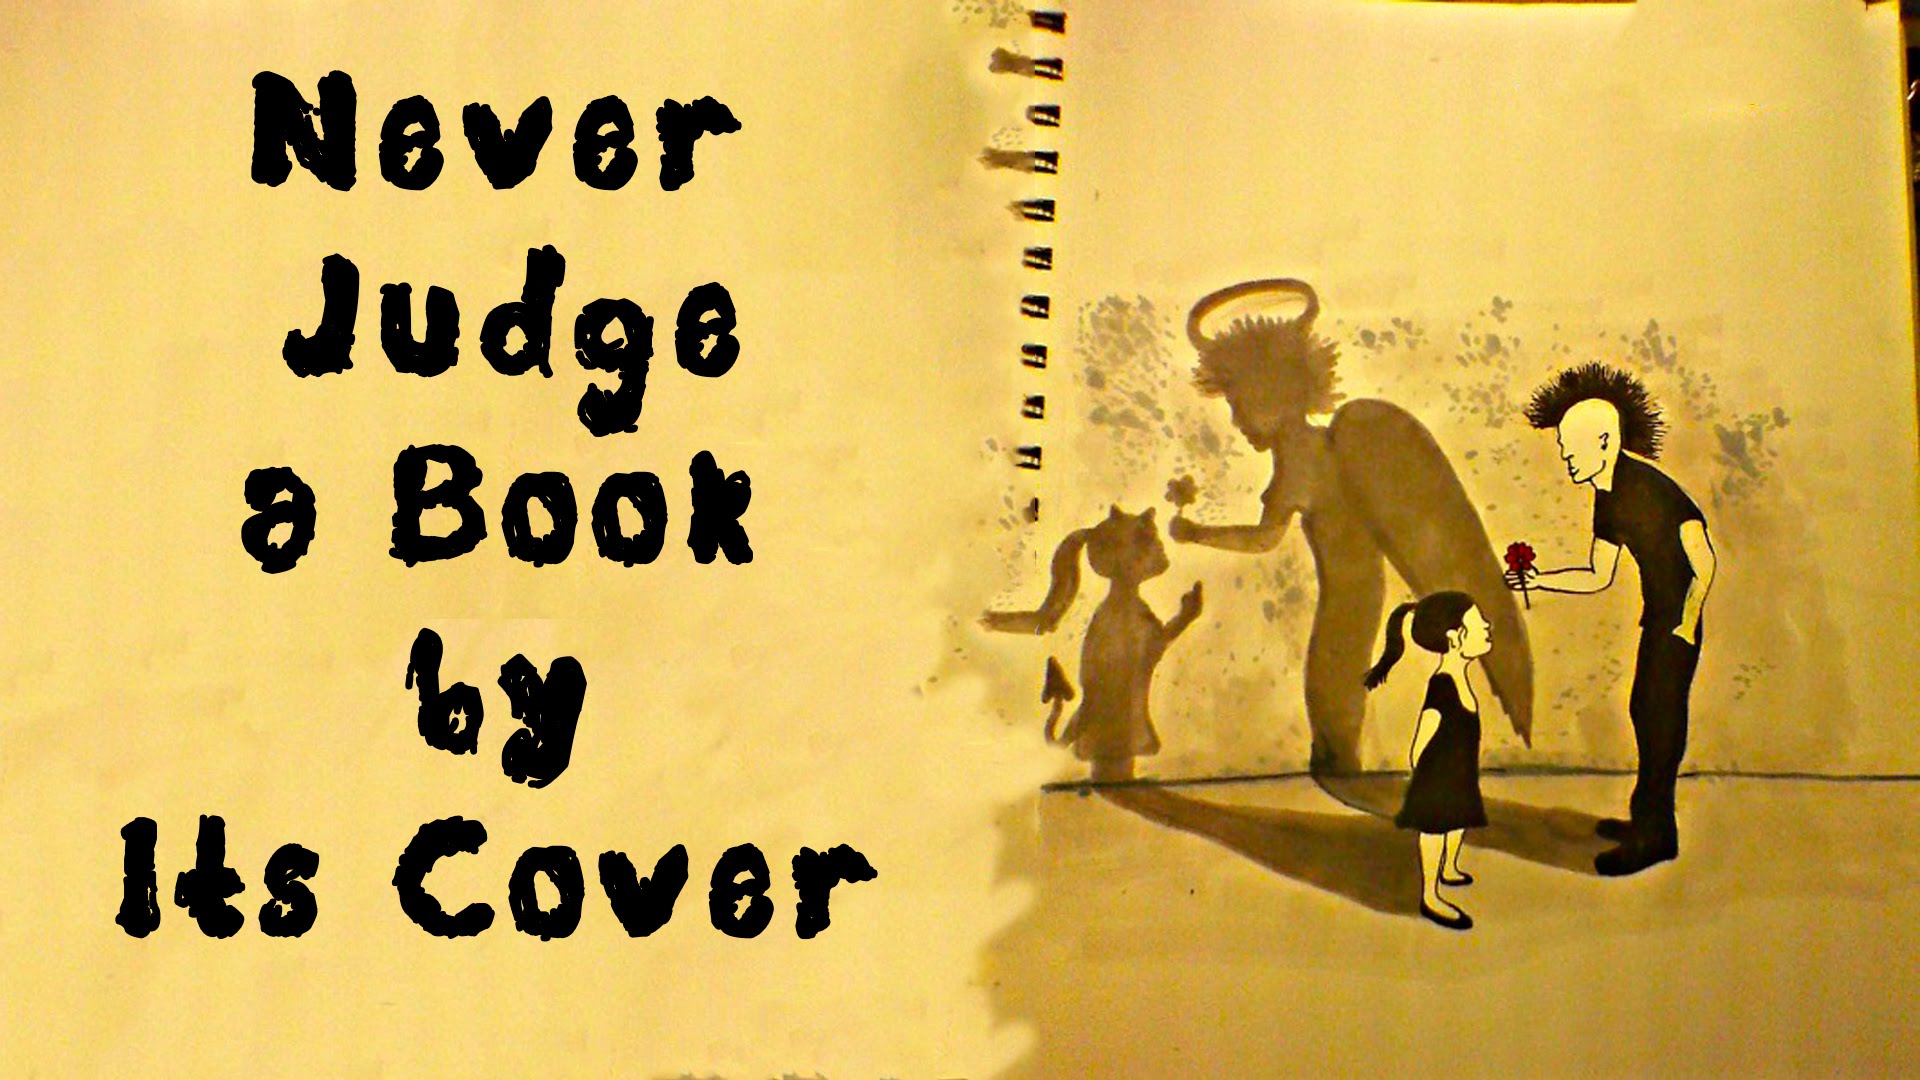 It s the good book. Judge a book by its Cover. Don't judge a book by its Cover. Never judge a book by its Cover. Do not judge a book by its Cover.